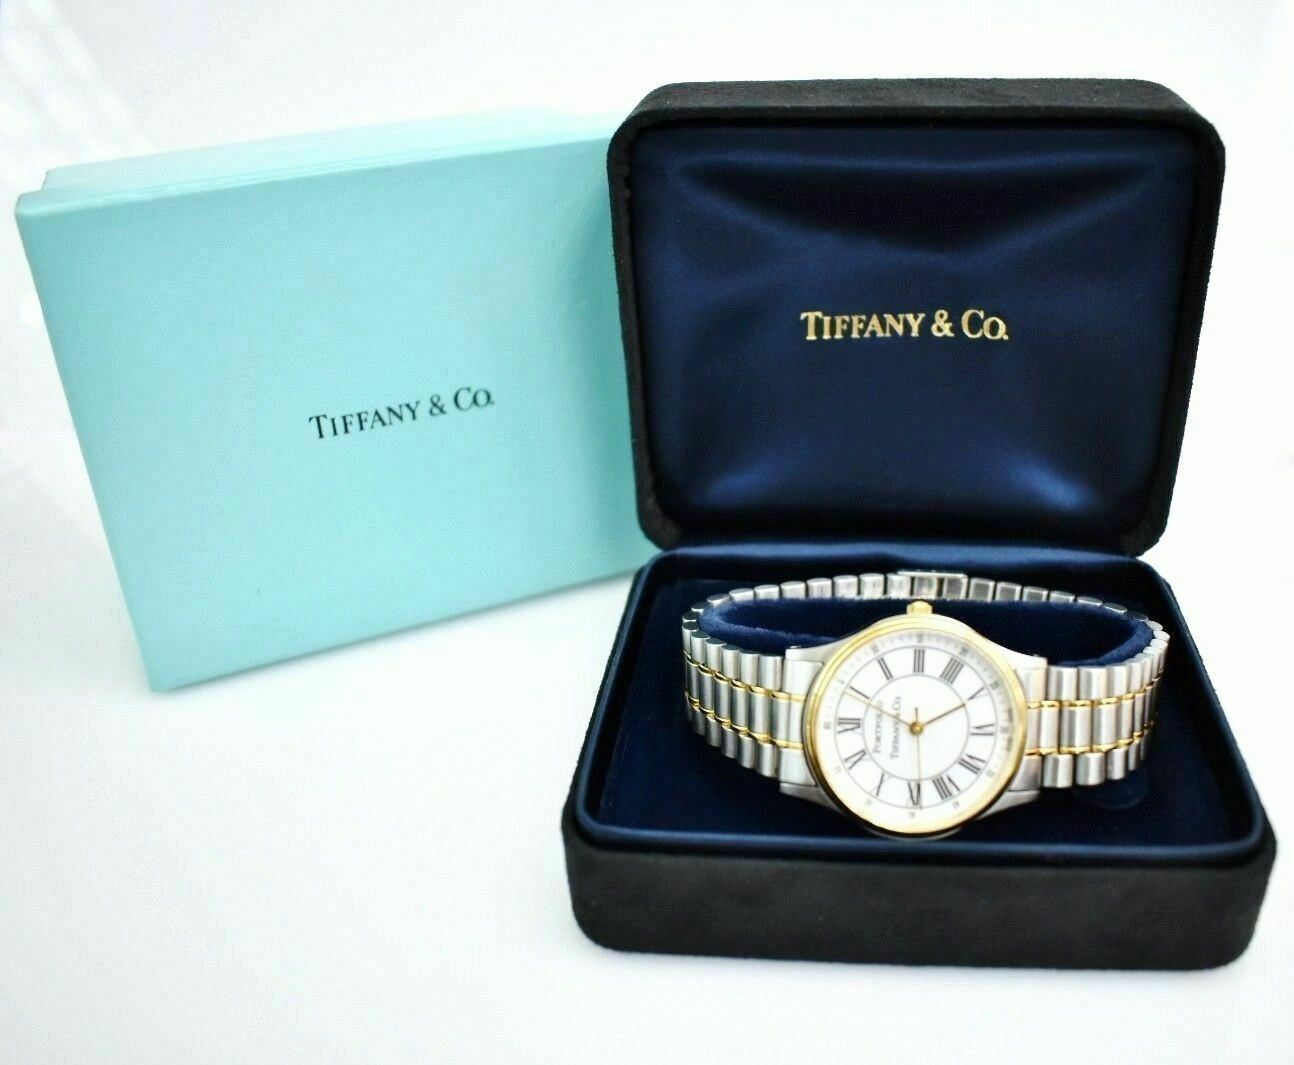 Tiffany & Co. 18K Yellow Gold and Stainless Steel Portfolio Watch